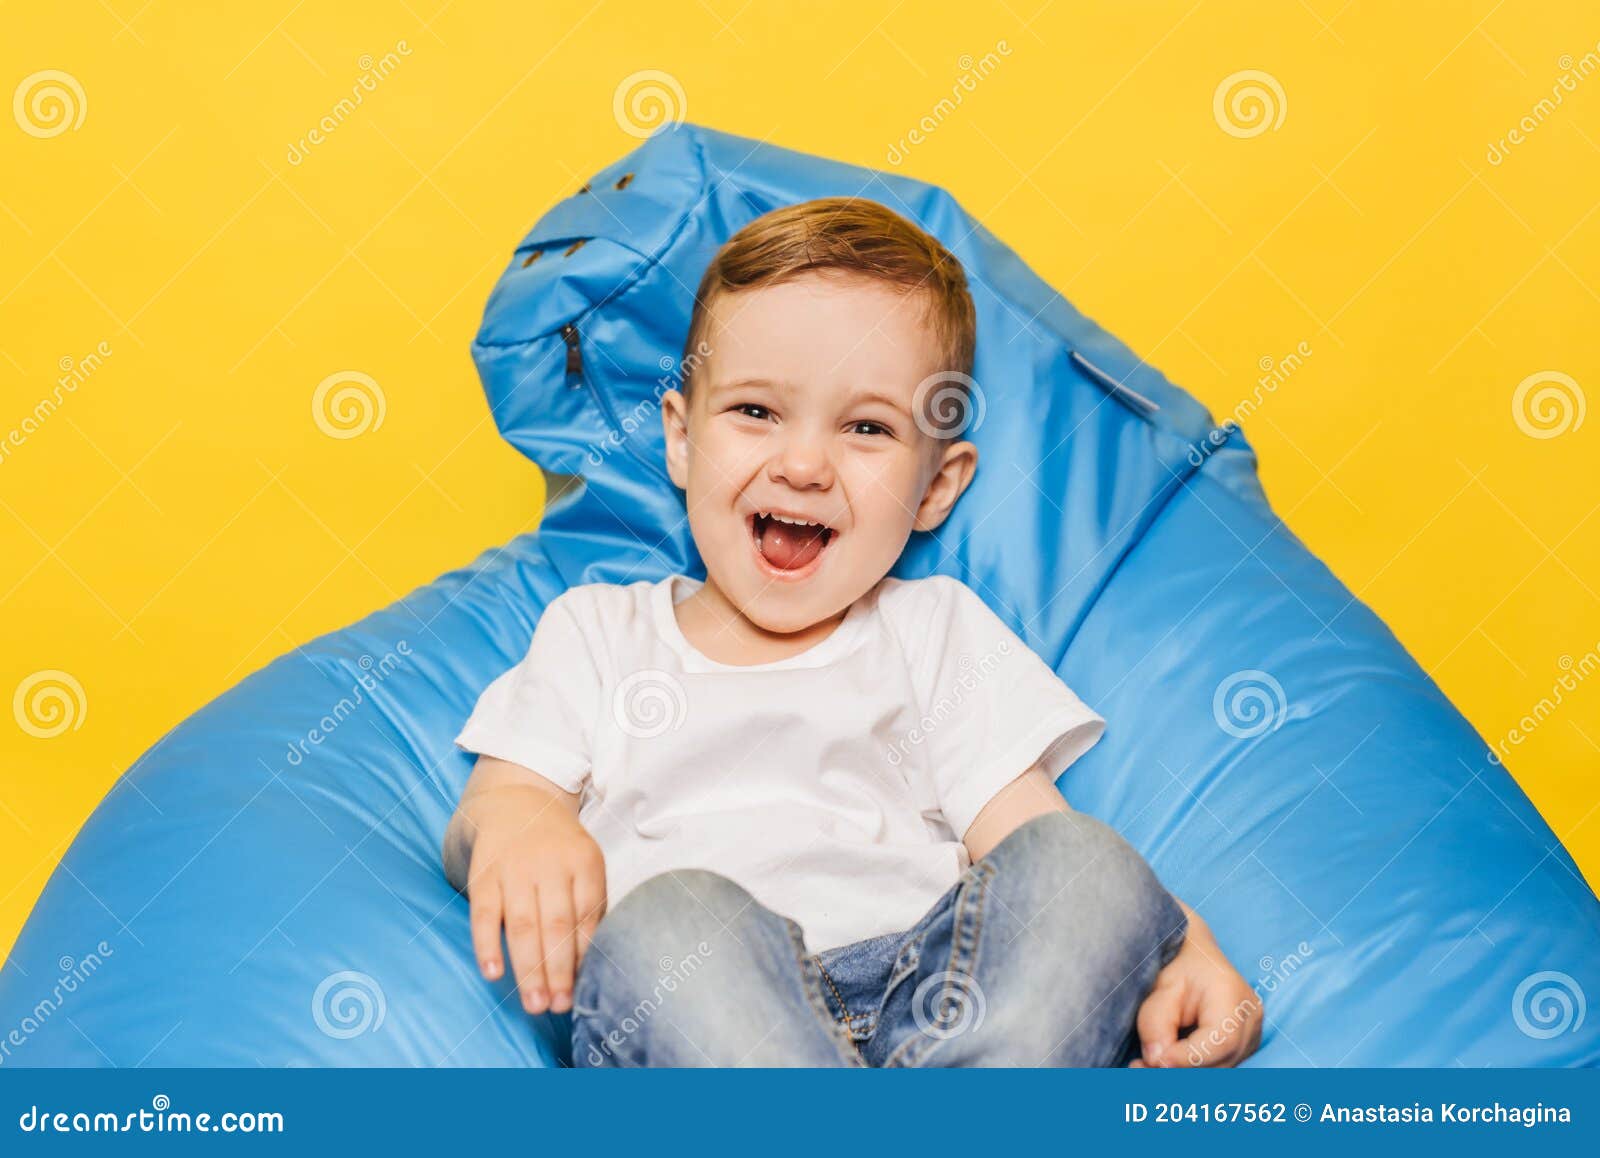 Laughing Little Boy on a Yellow Background Sitting in a Blue Chair ...